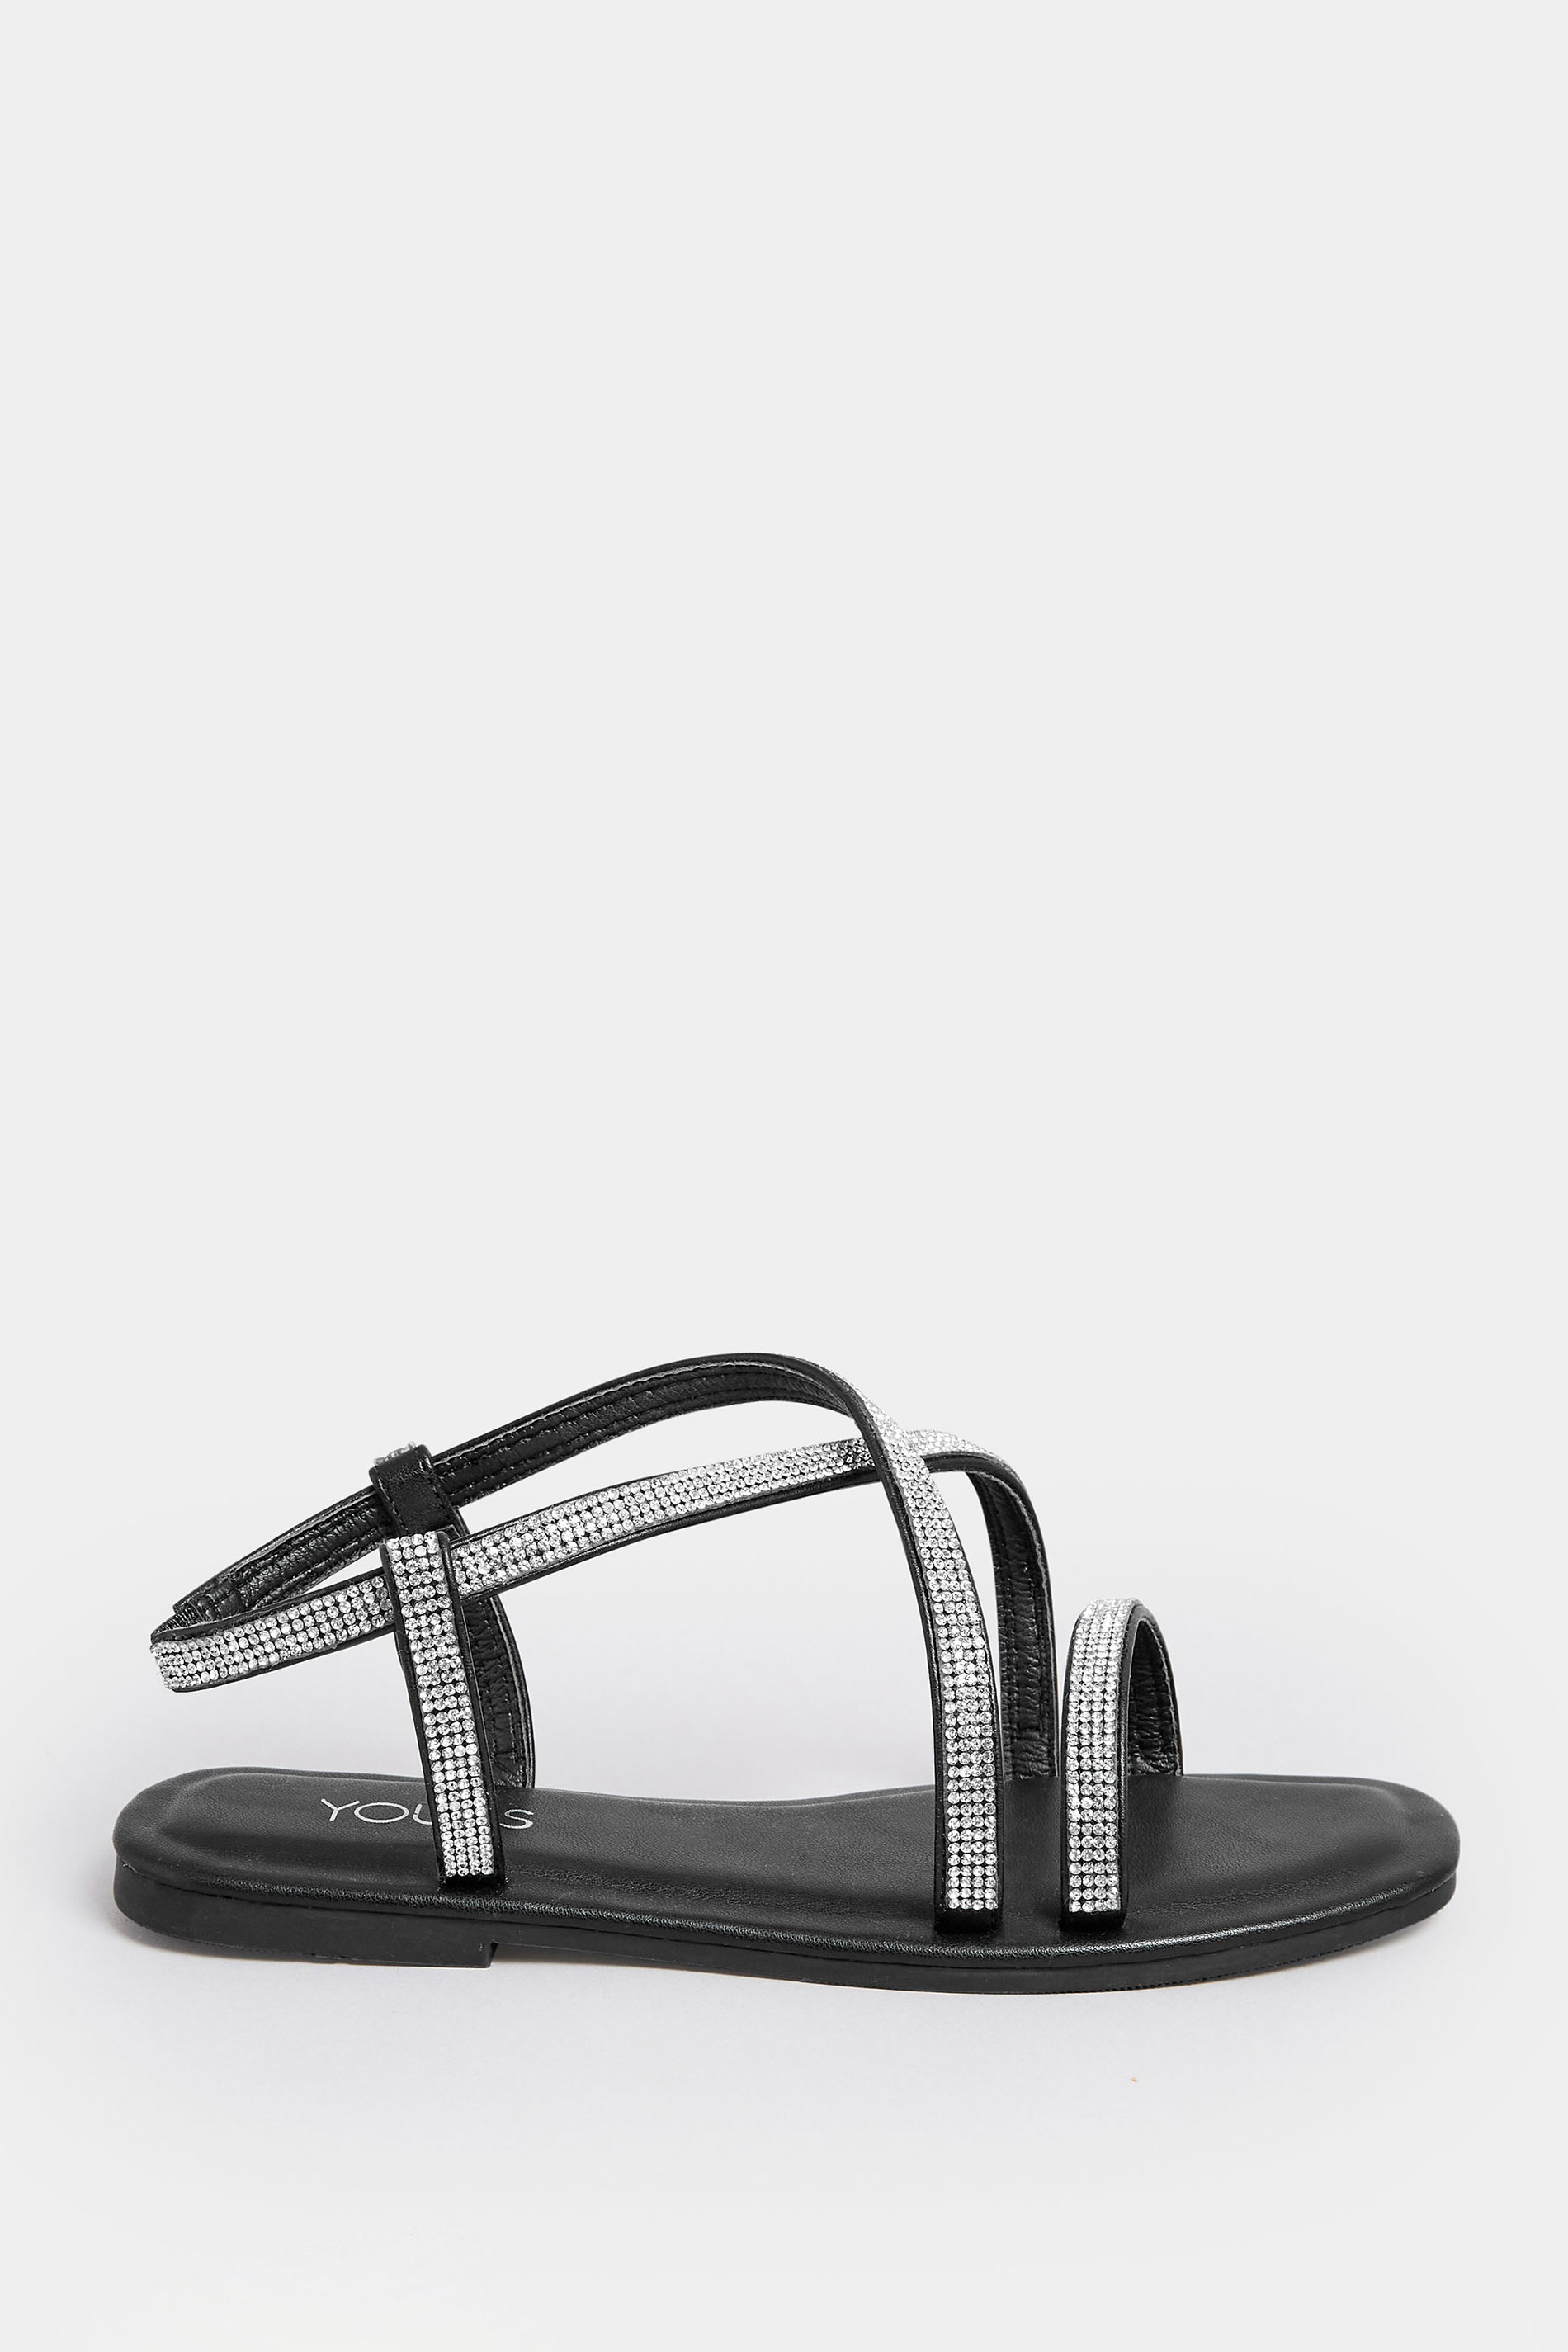 YOURS Curve Black Diamante Strap Sandals In Wide E Fit & Extra Wide EEE Fit | Yours Clothing  3